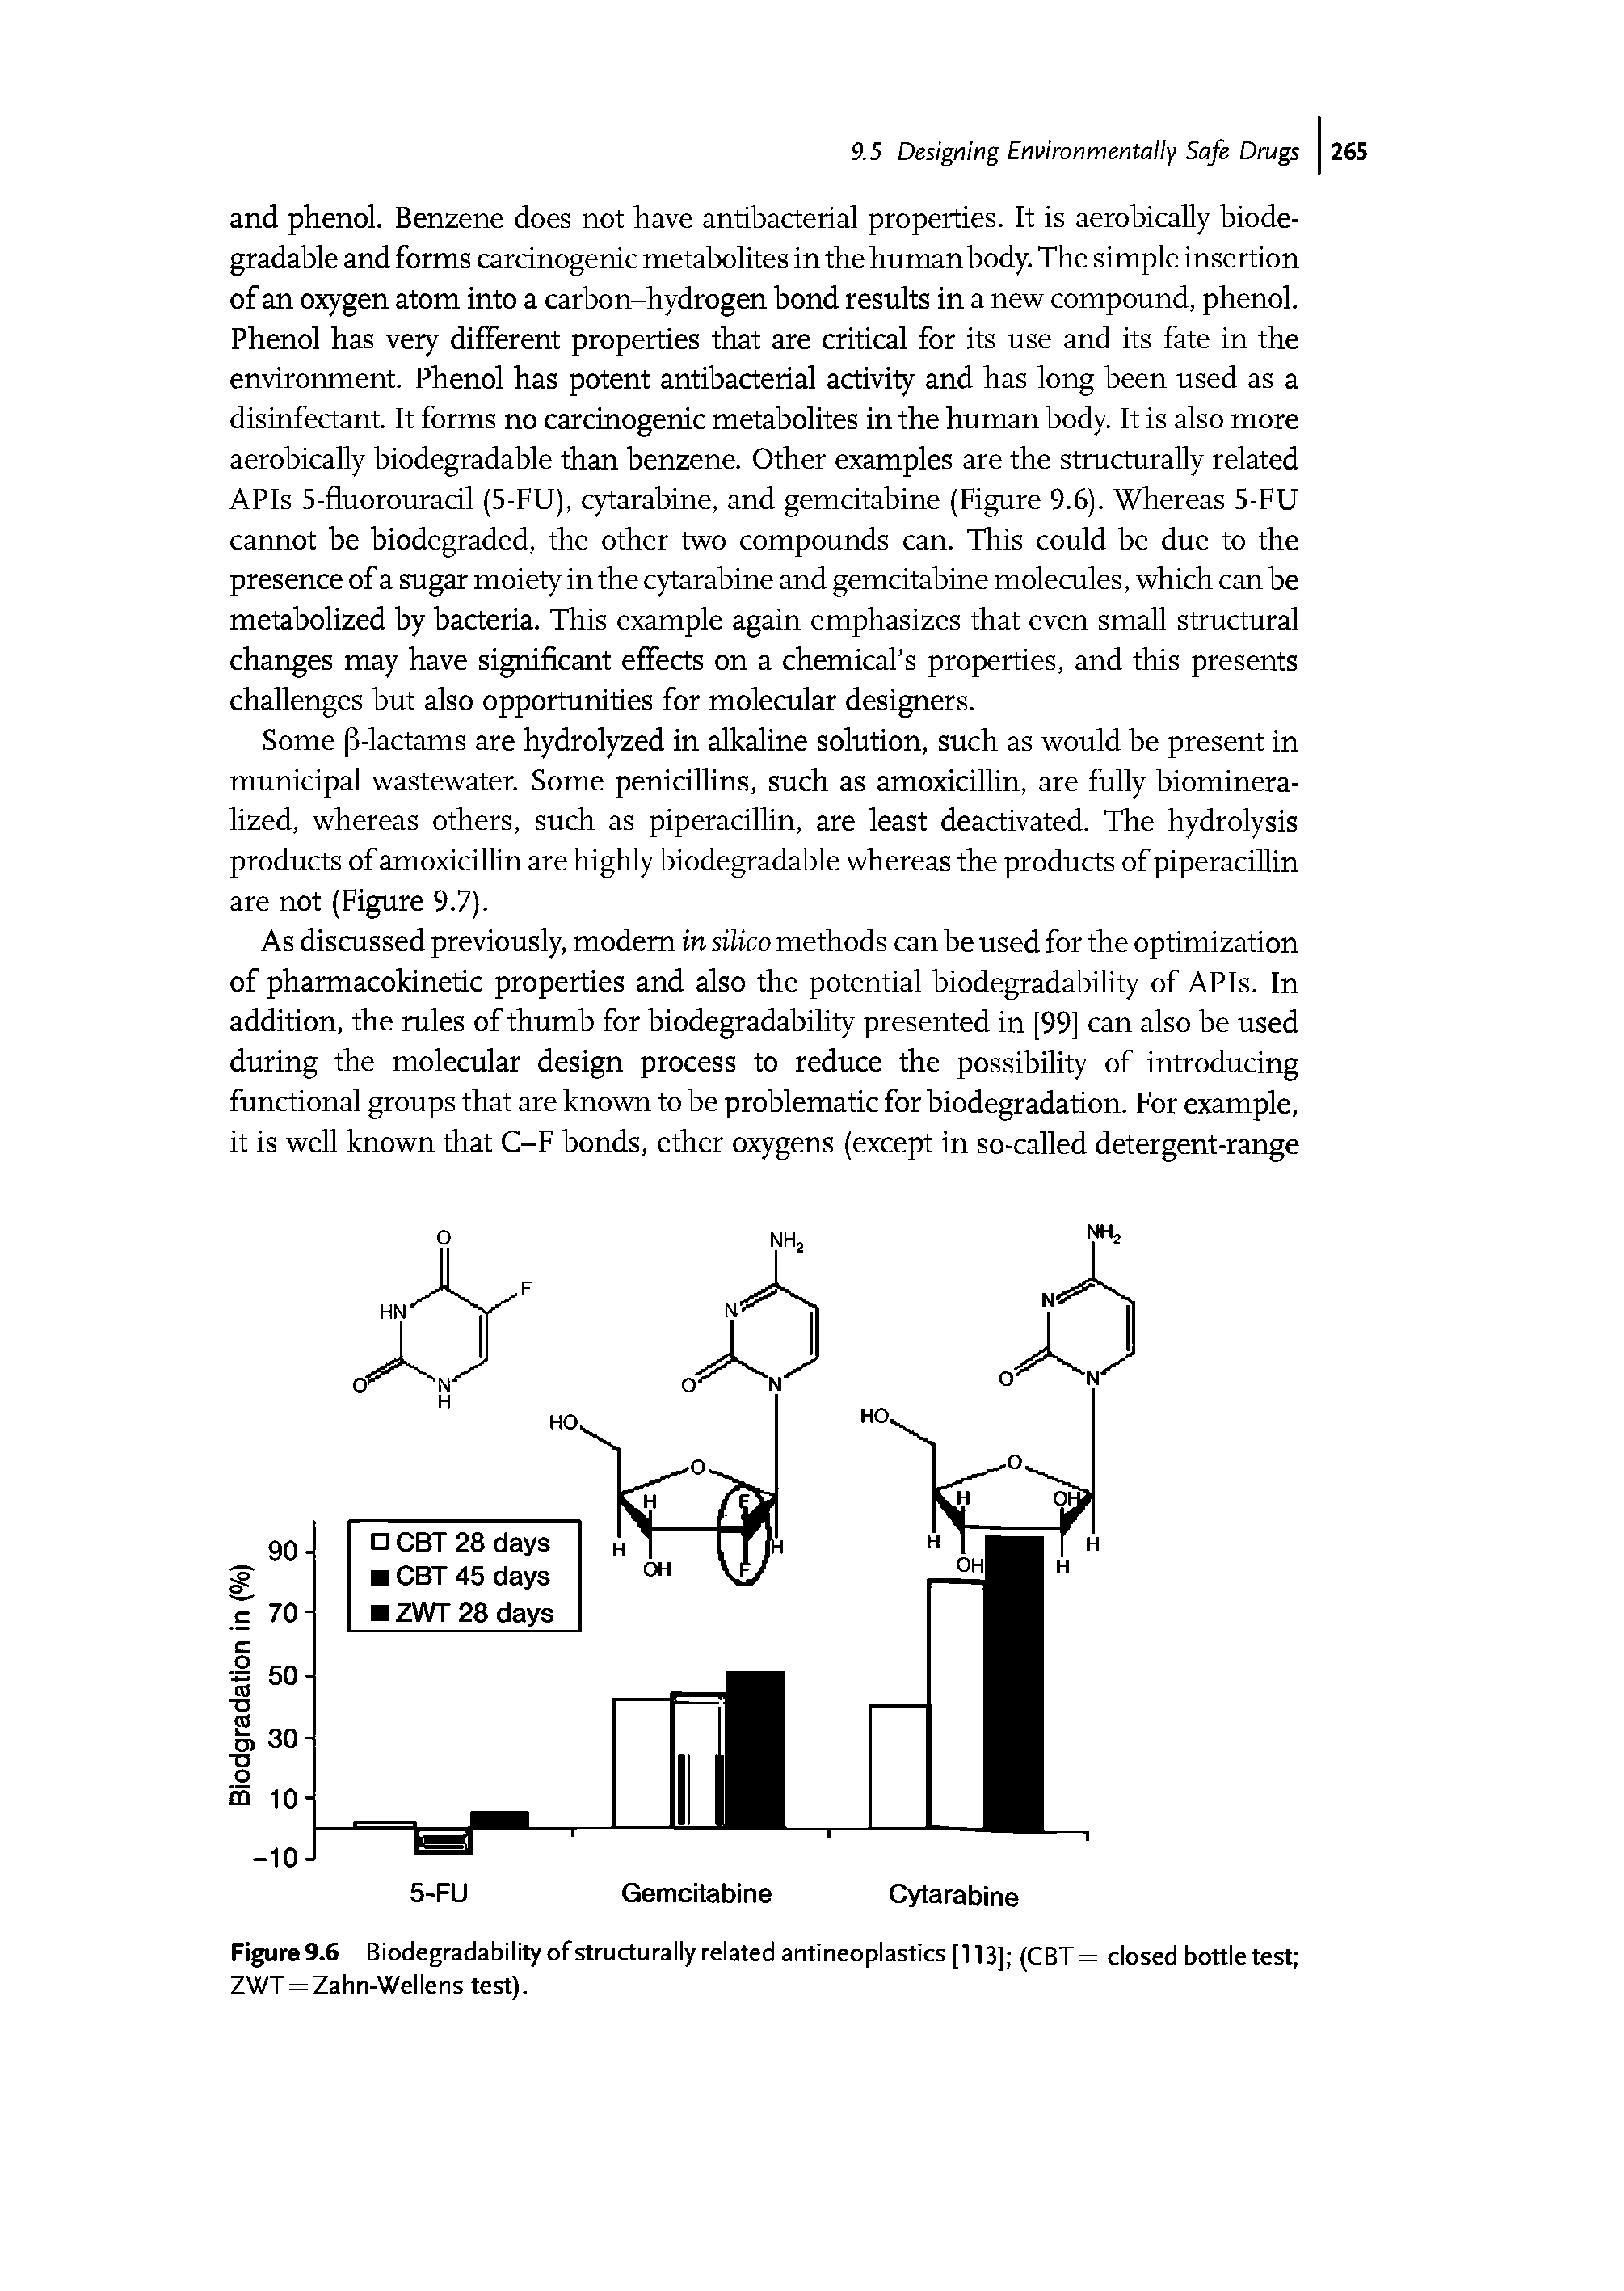 Figure 9.6 Biodegradability of structurally related antineoplastics [113] (CBT— closed bottle test ZWT = Zahn-Wellens test).